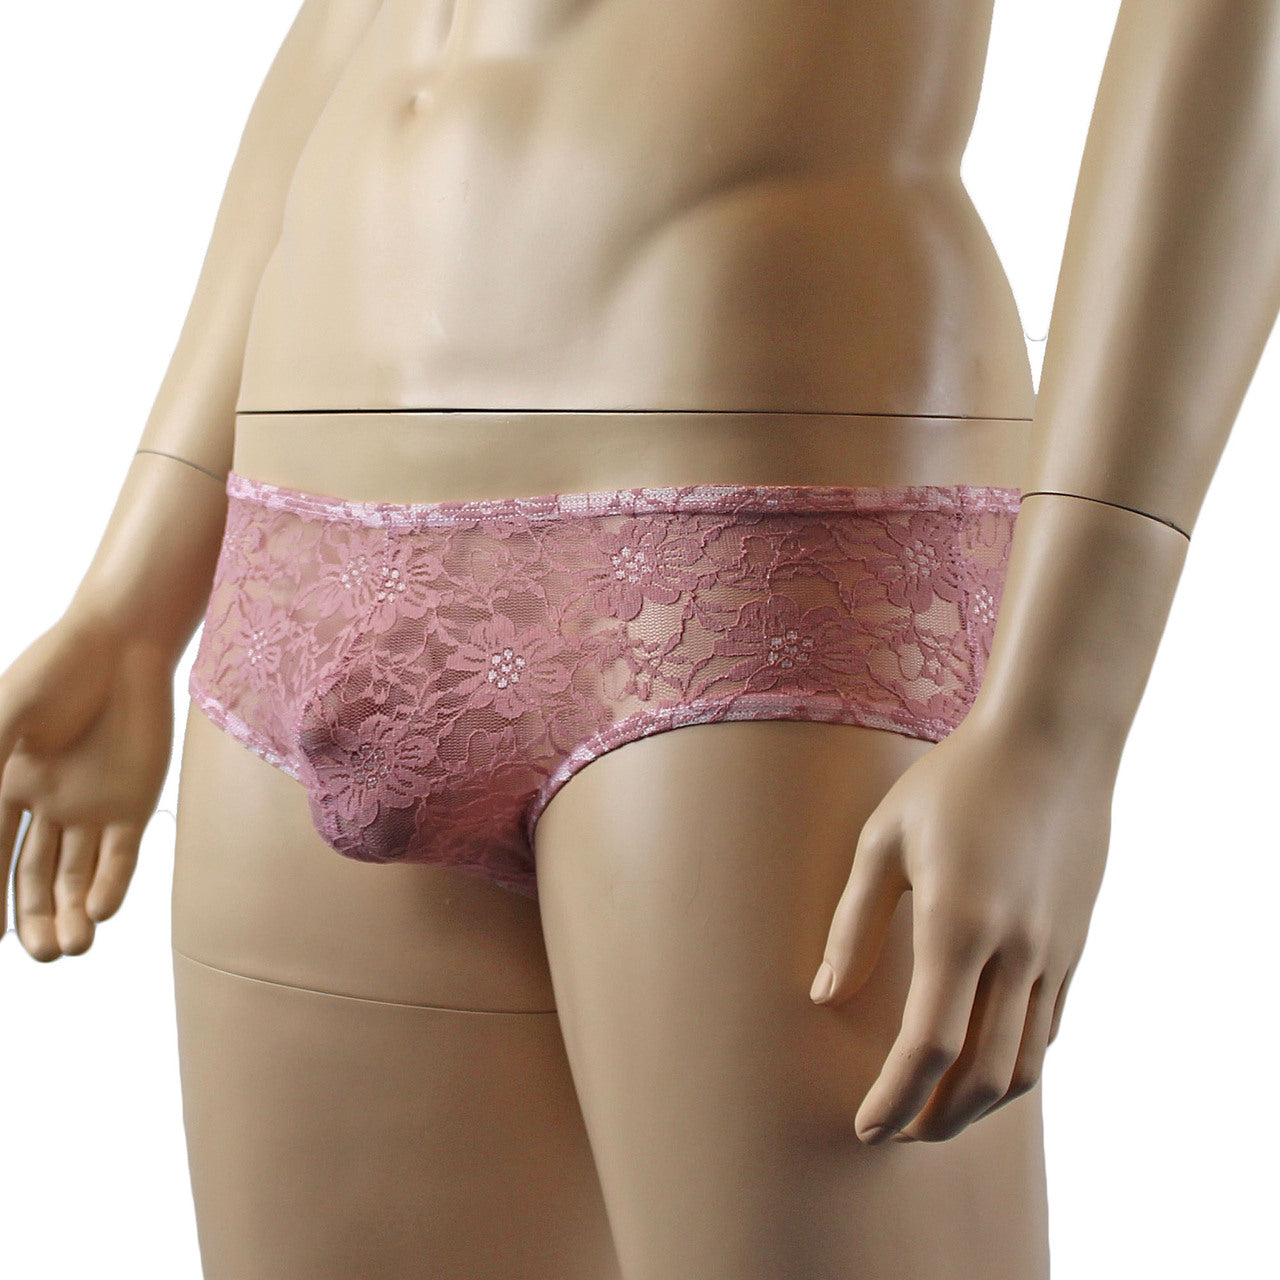 Mens Lingerie Stretch Lace  Male Panty Bikini Brief (dusty pink plus other colours)